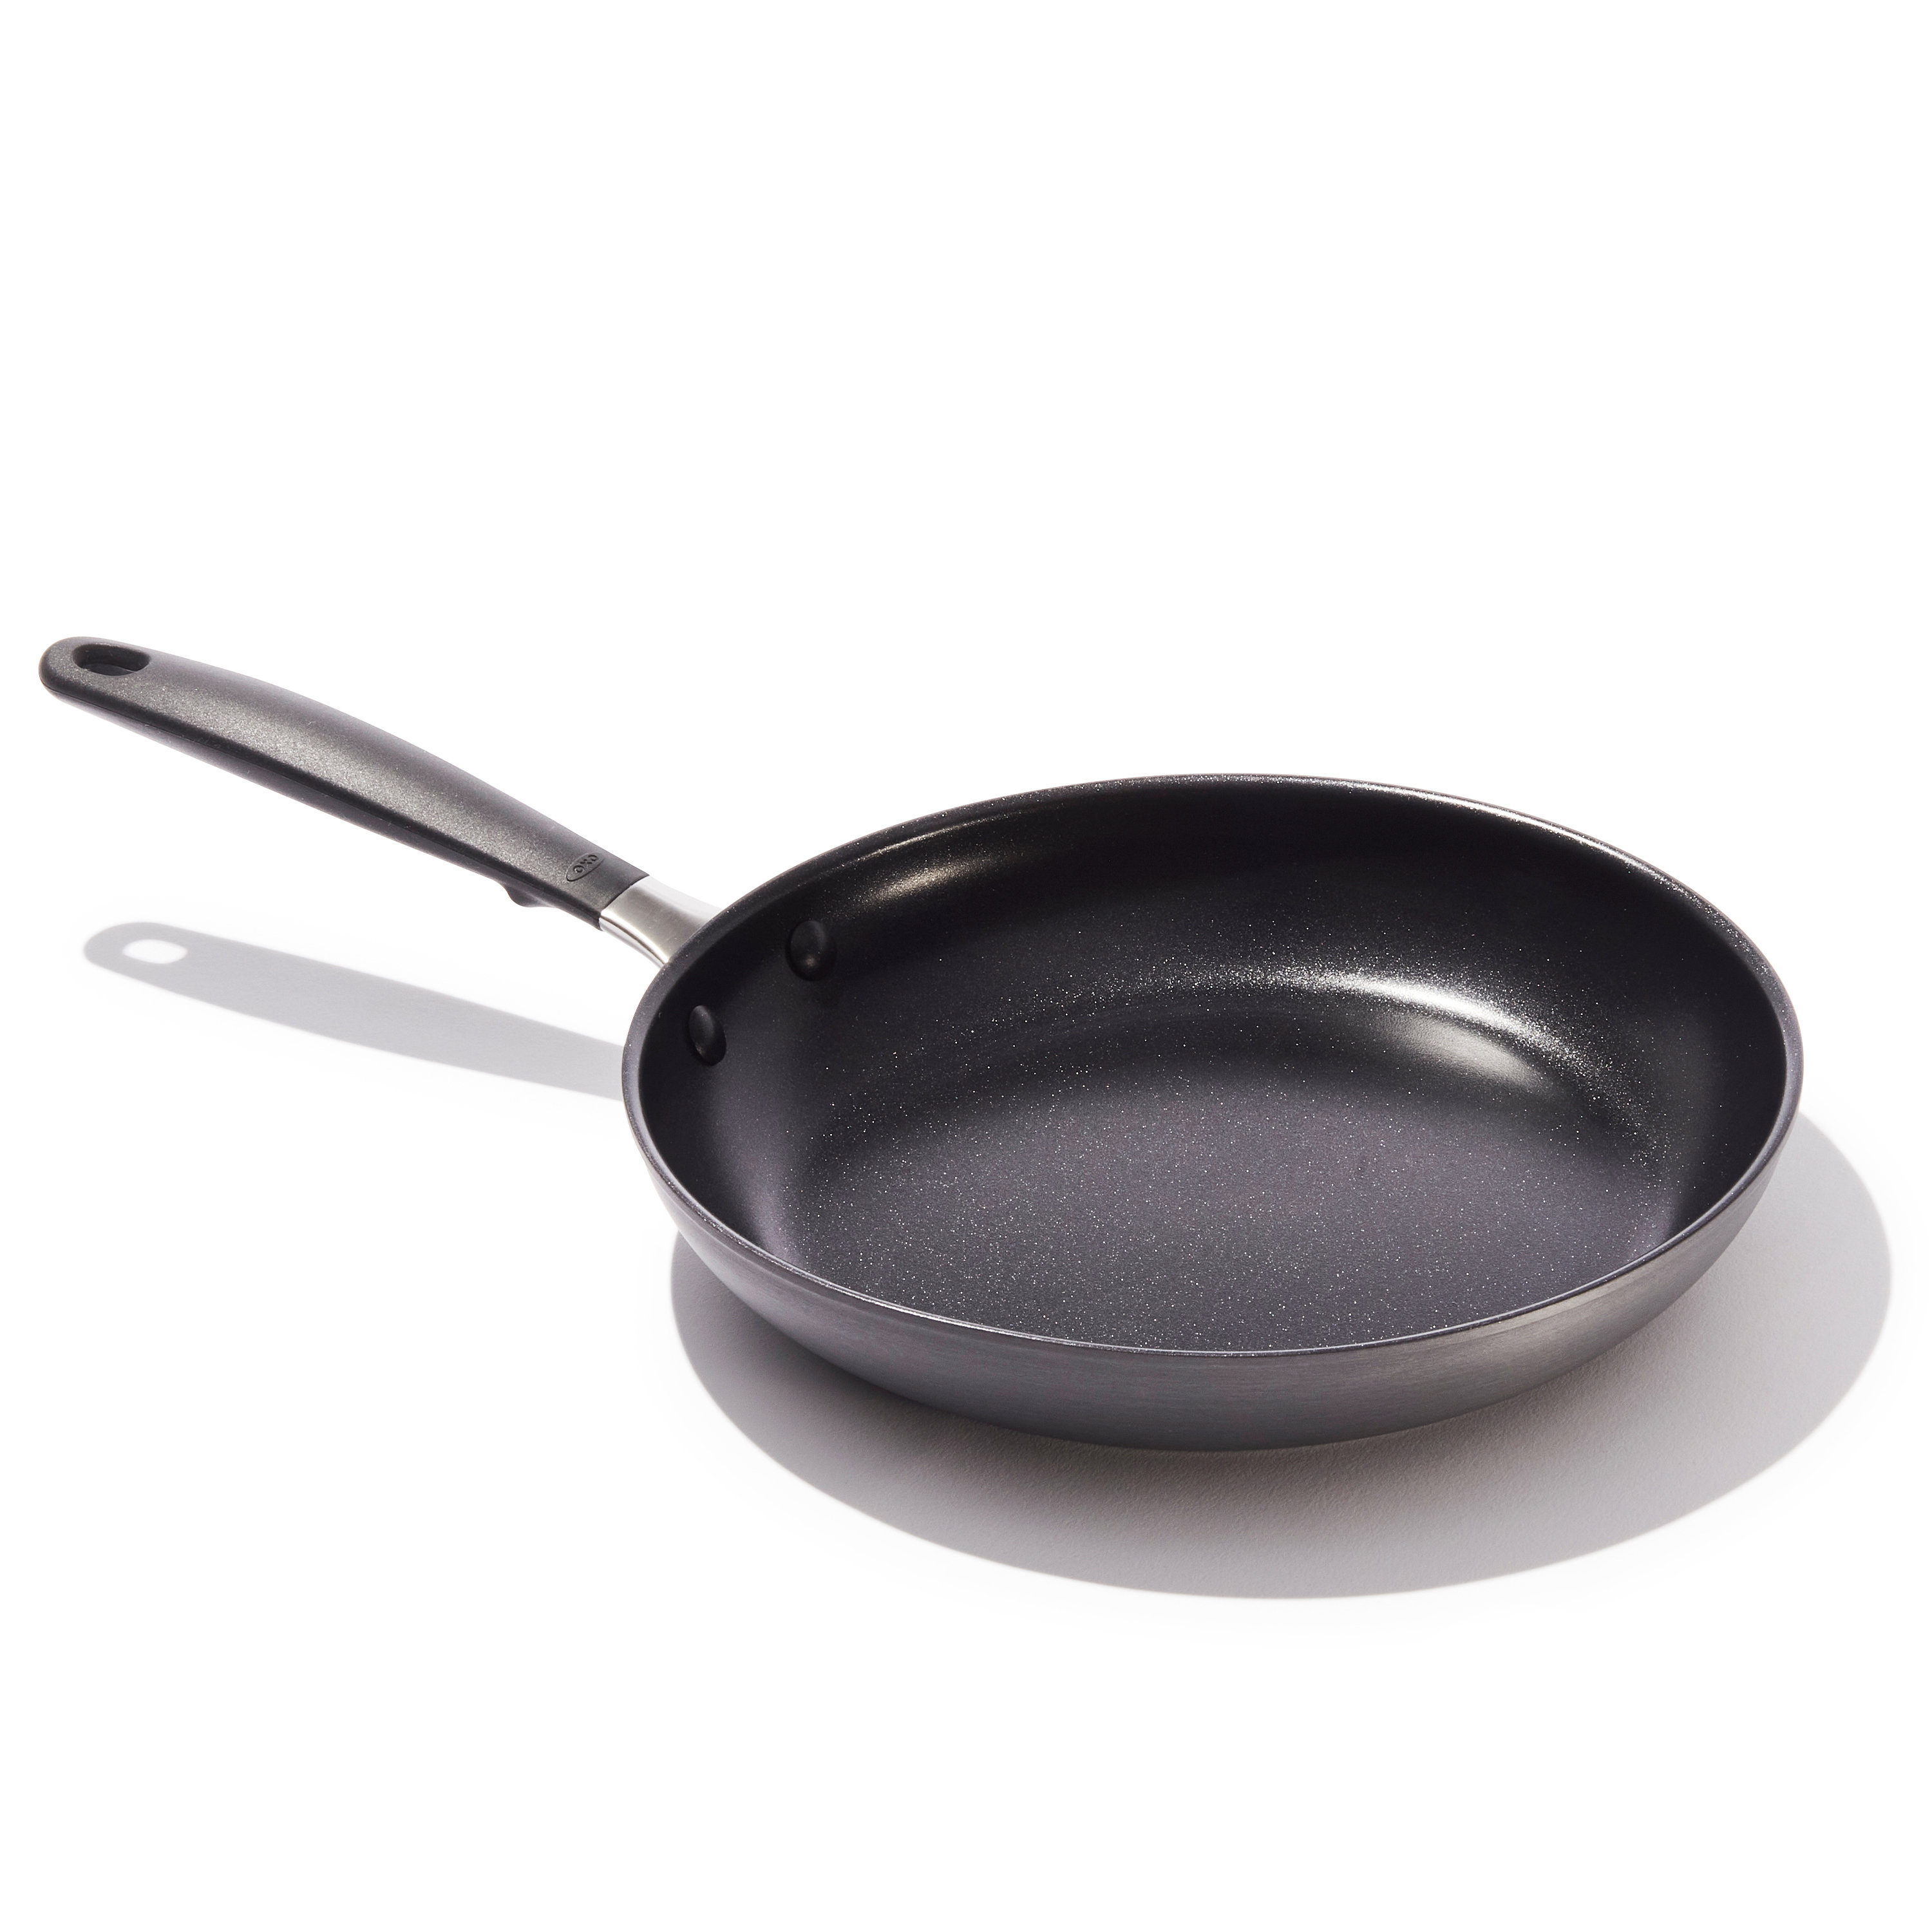 OXO 10 in. Non Stick Hard-Anodized Aluminum Frying Pan & Reviews